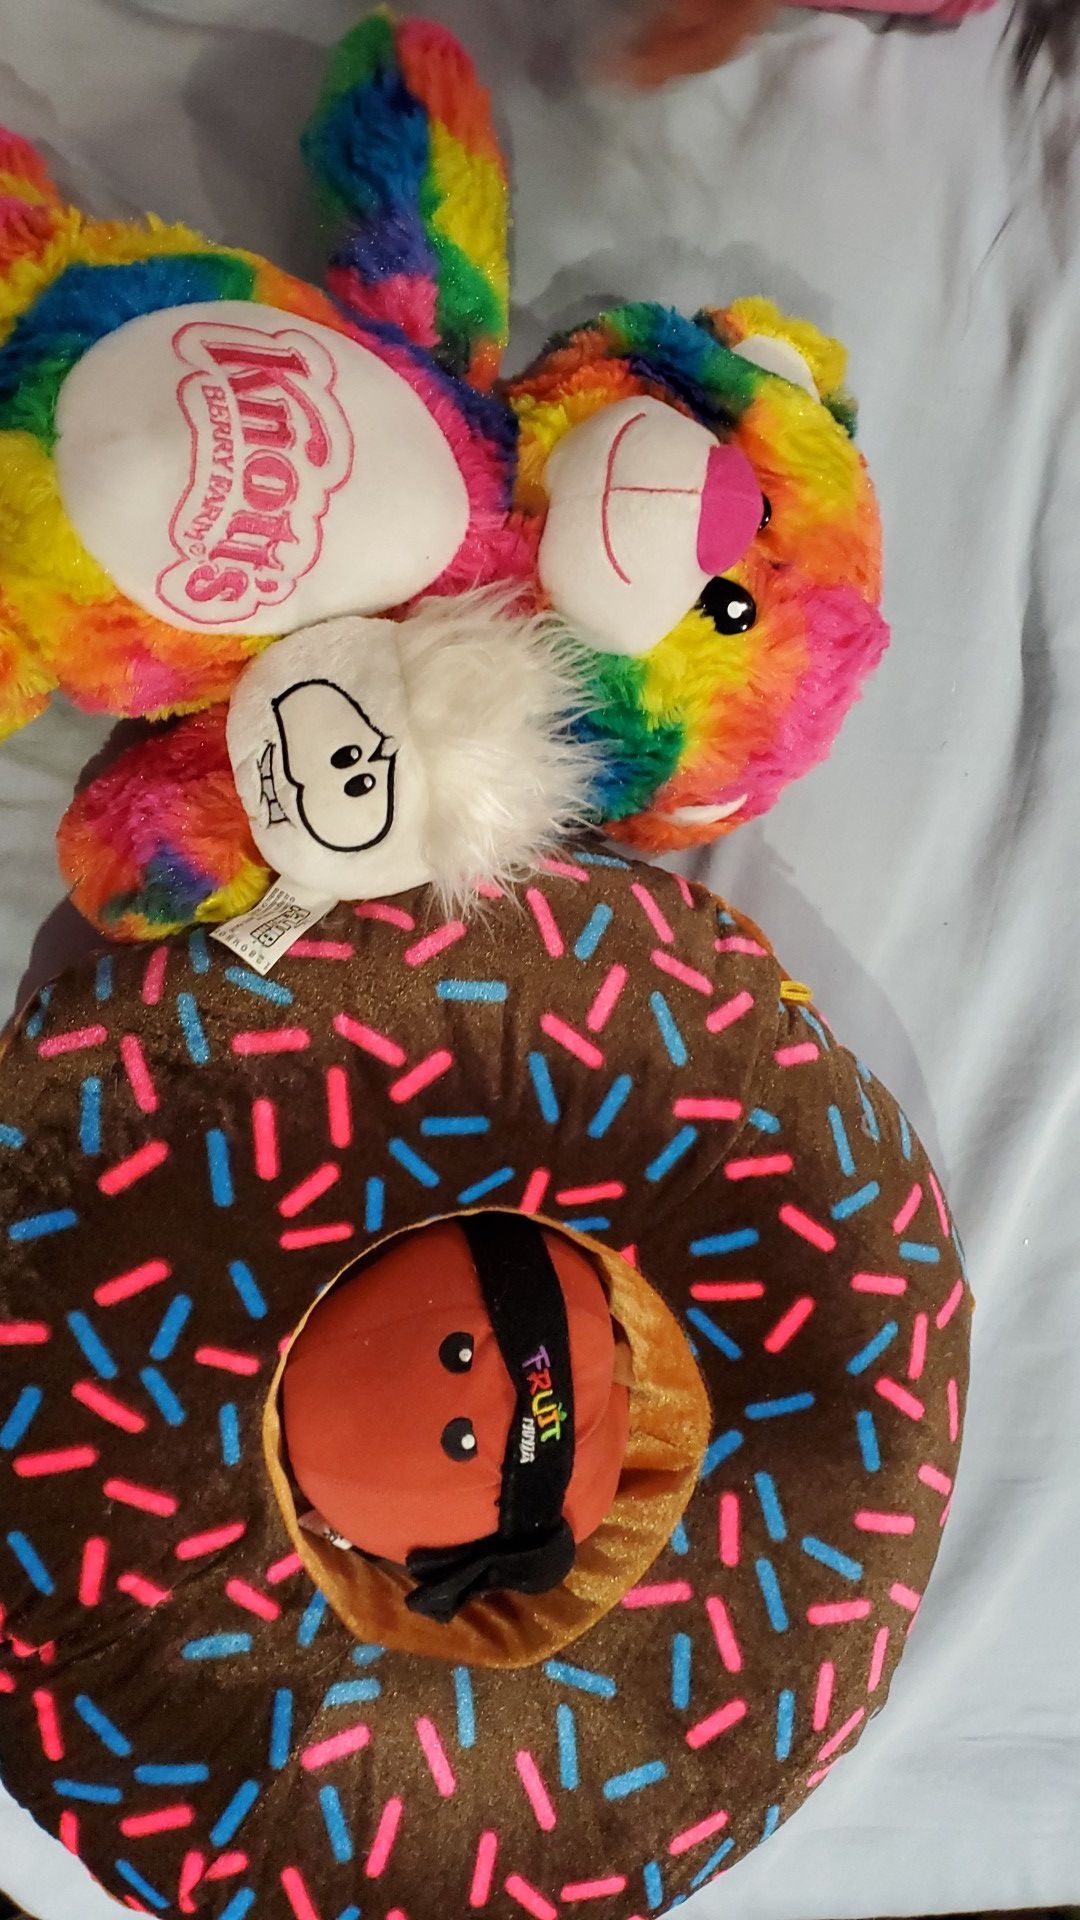 Stuff animals for free must pickup